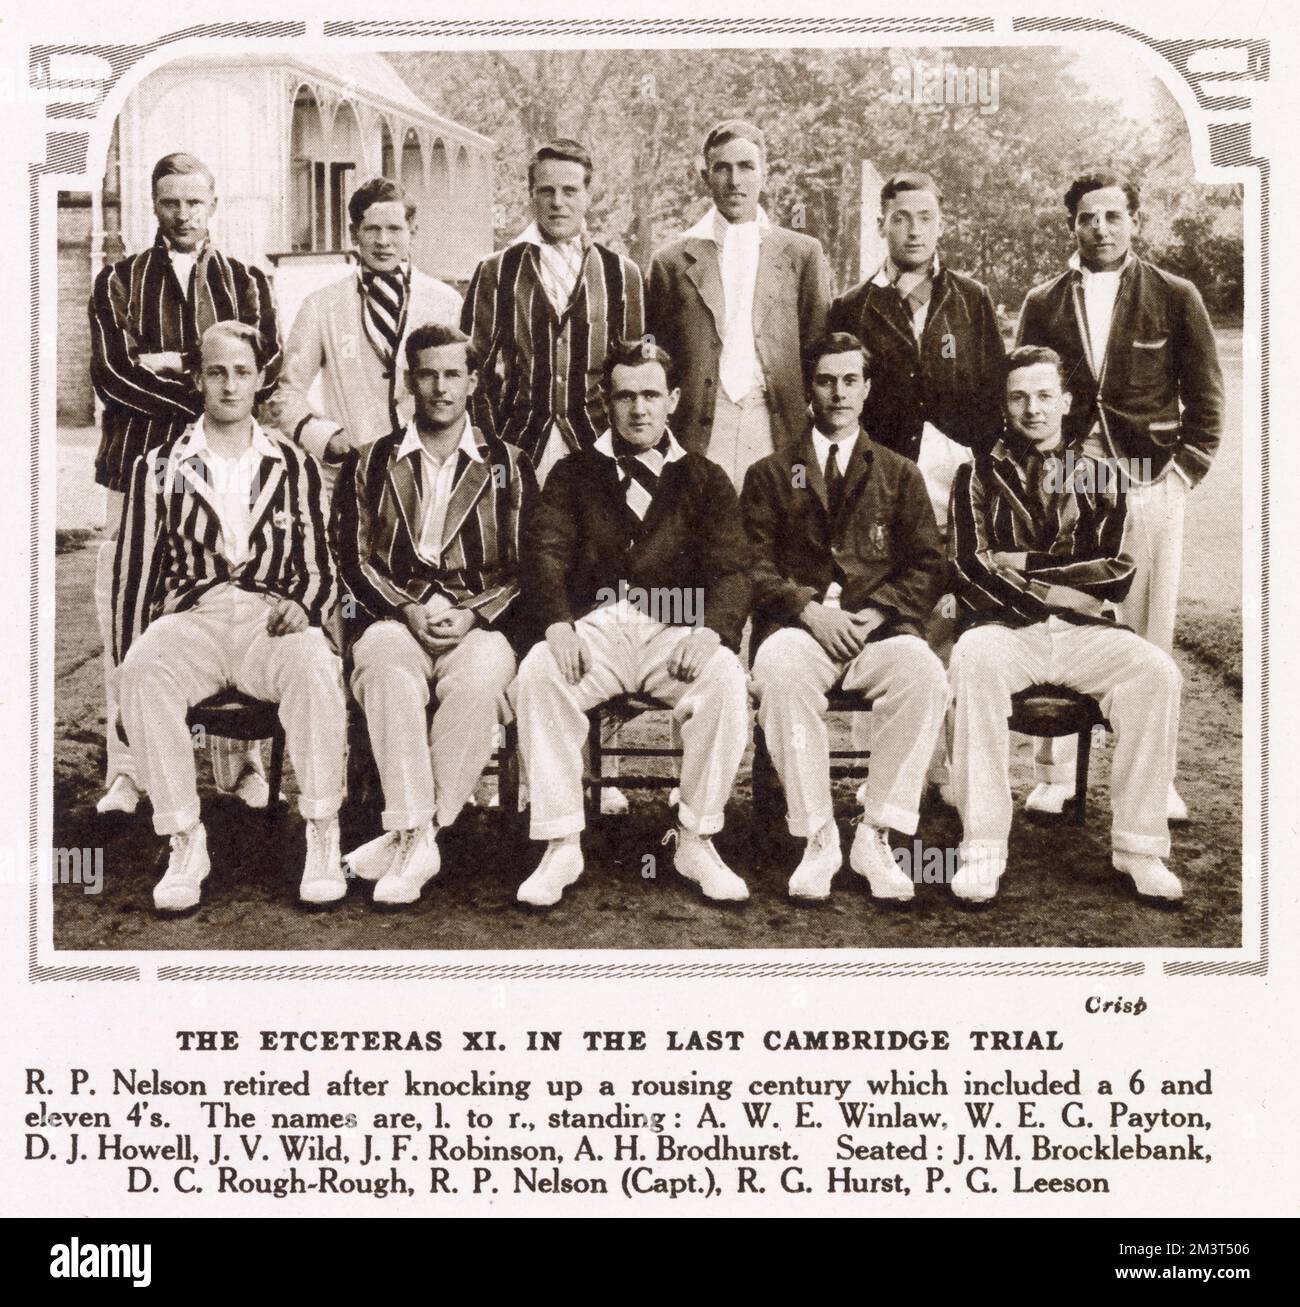 Cricket team the Etceteras XI in the last Cambridge trial of the seaon. Left to right, standing: A.W.E. Winlaw, W.E.G. Payton, D.J. Howell, J.V. Wild, J.F. Robinson, A.H. Brodhurst. Seated: J.M. Brocklebank, D.C. Rough-Rough, R.P. Nelson (Capt.), R.G. Hurst, P.G. Leeson. Stock Photo